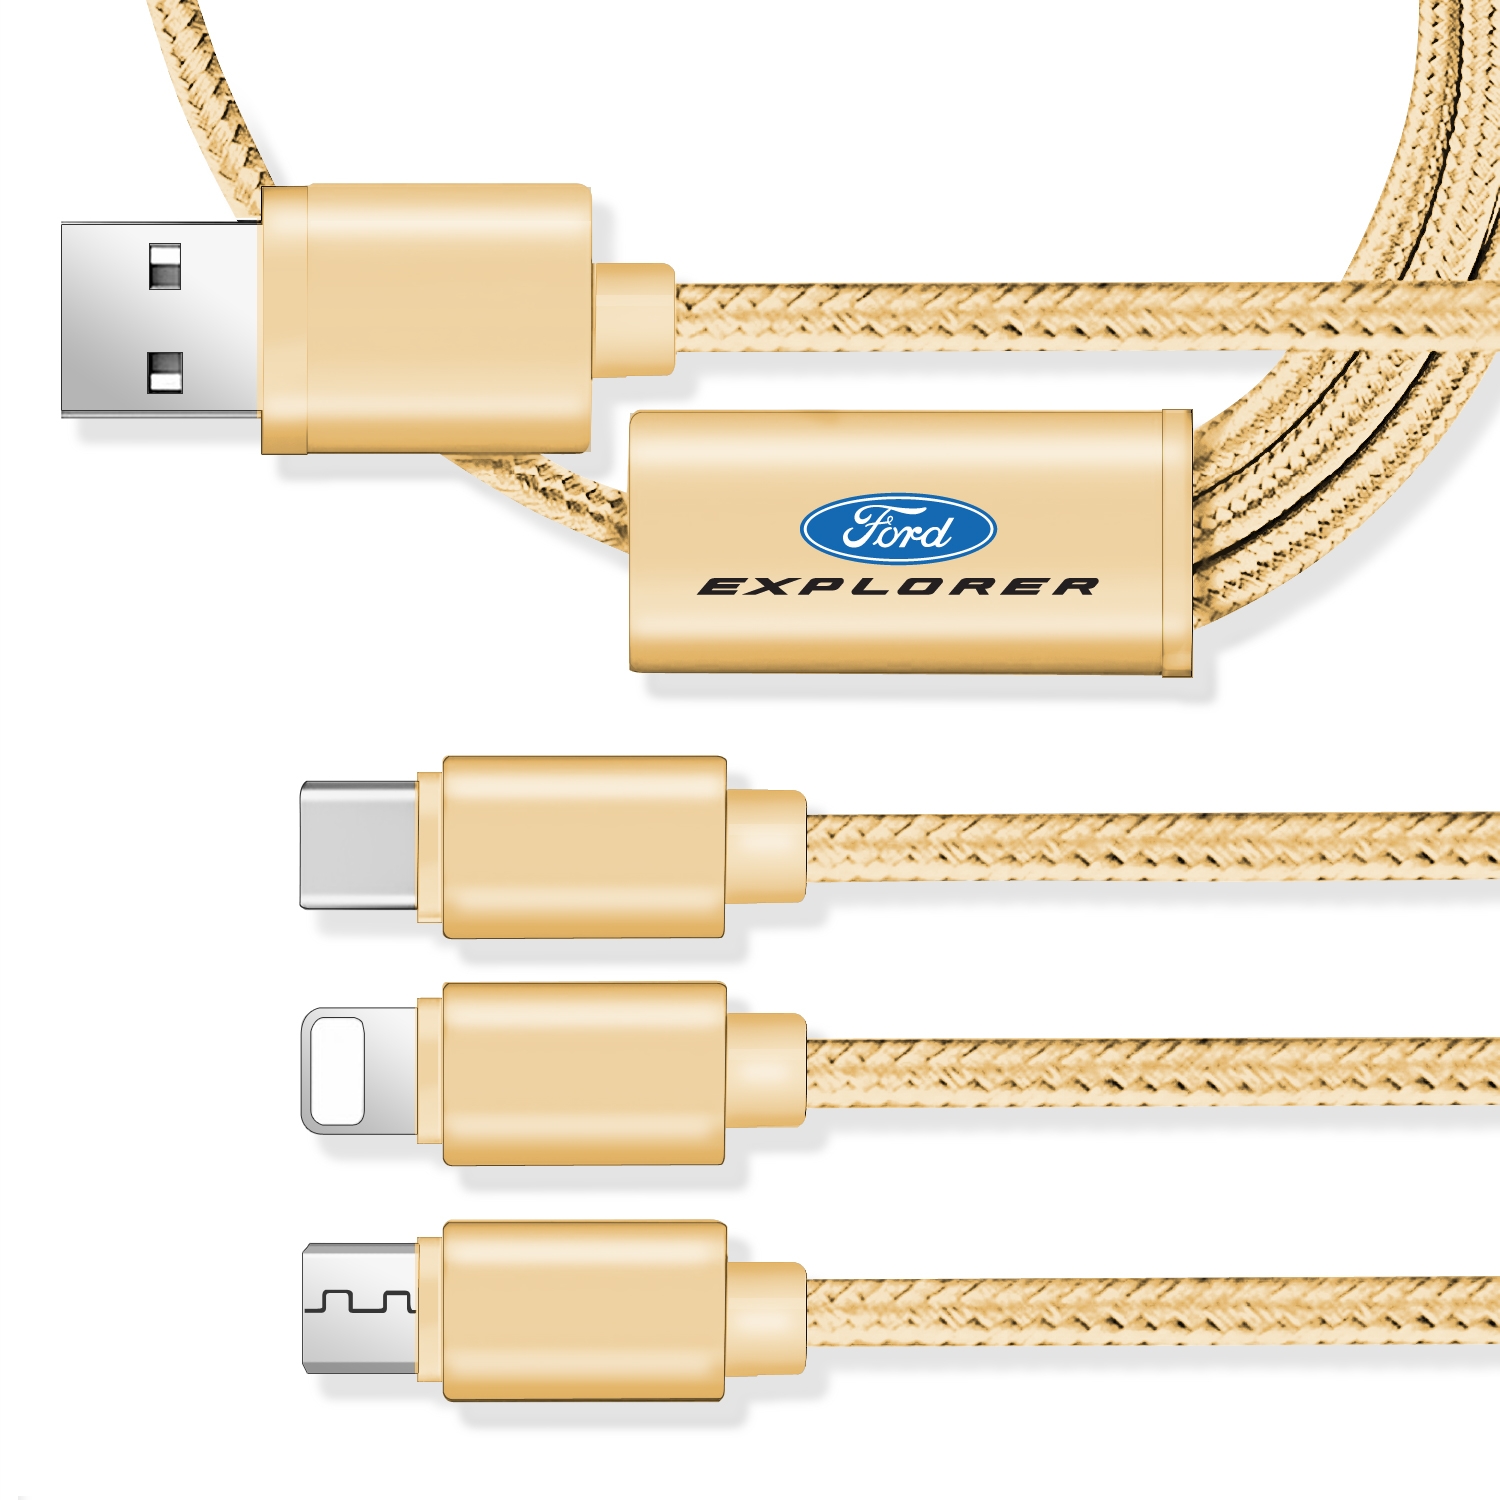 Ford Explorer 3 in 1 Golden 4 Ft Premium Multi Charging Cord USB Cable